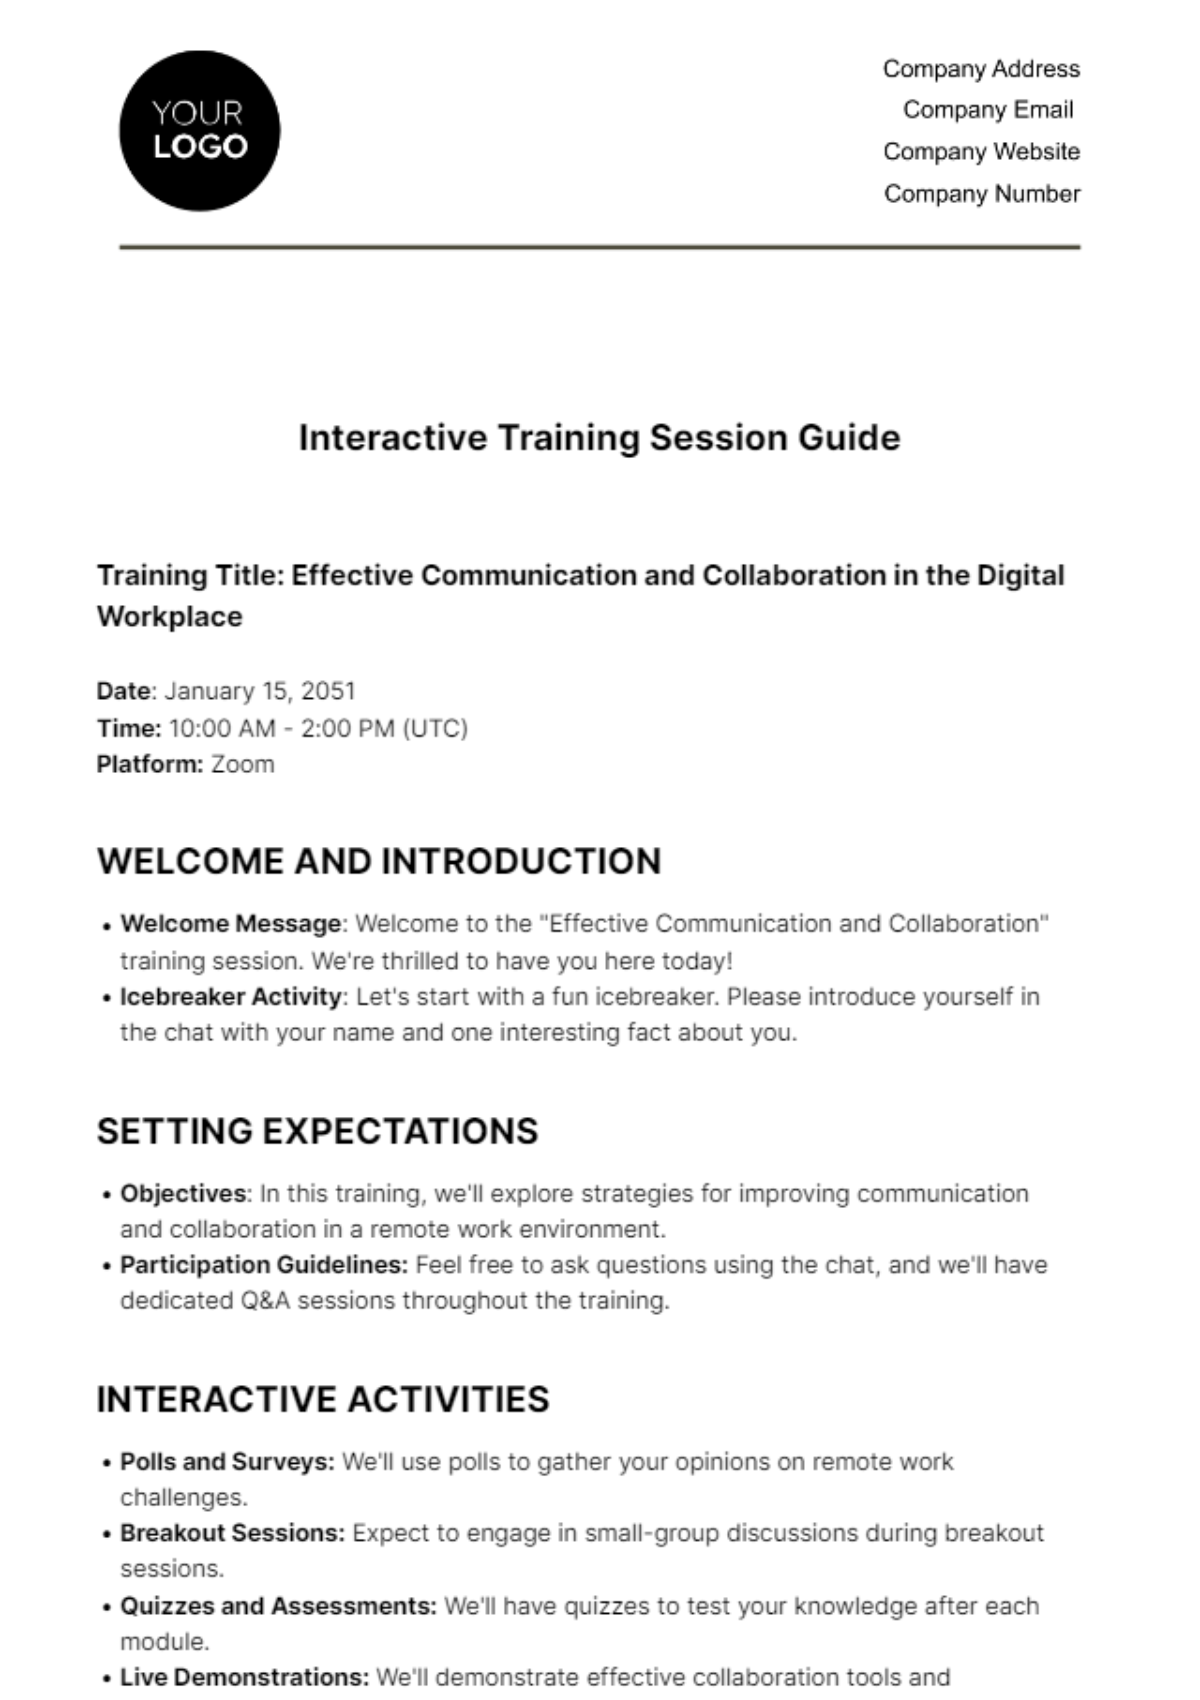 Interactive Training Session Guide HR Template